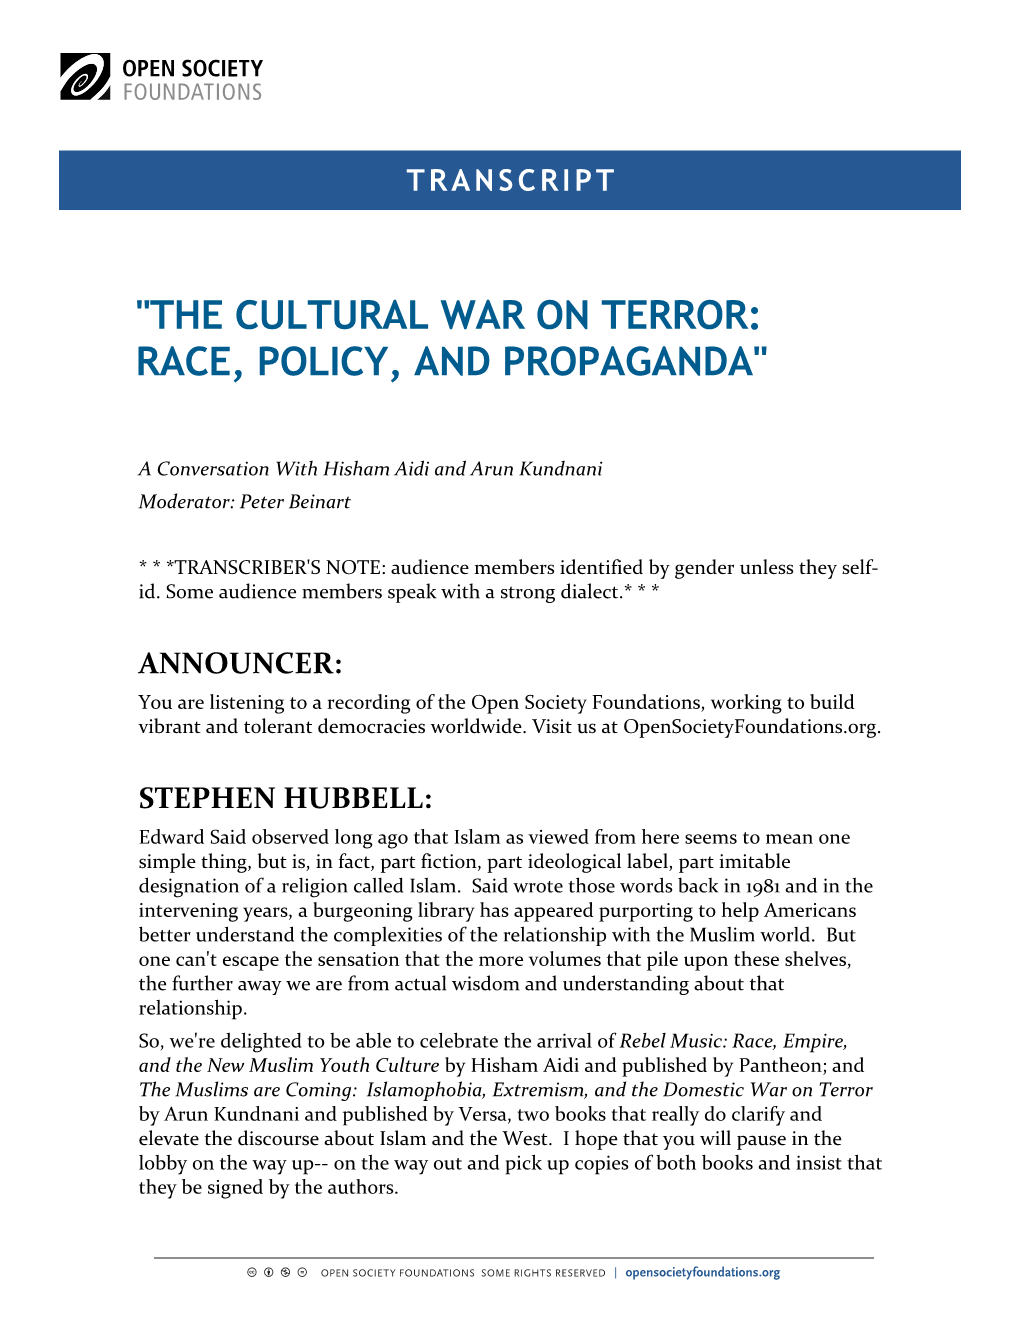 The Cultural War on Terror: Race, Policy, and Propaganda"